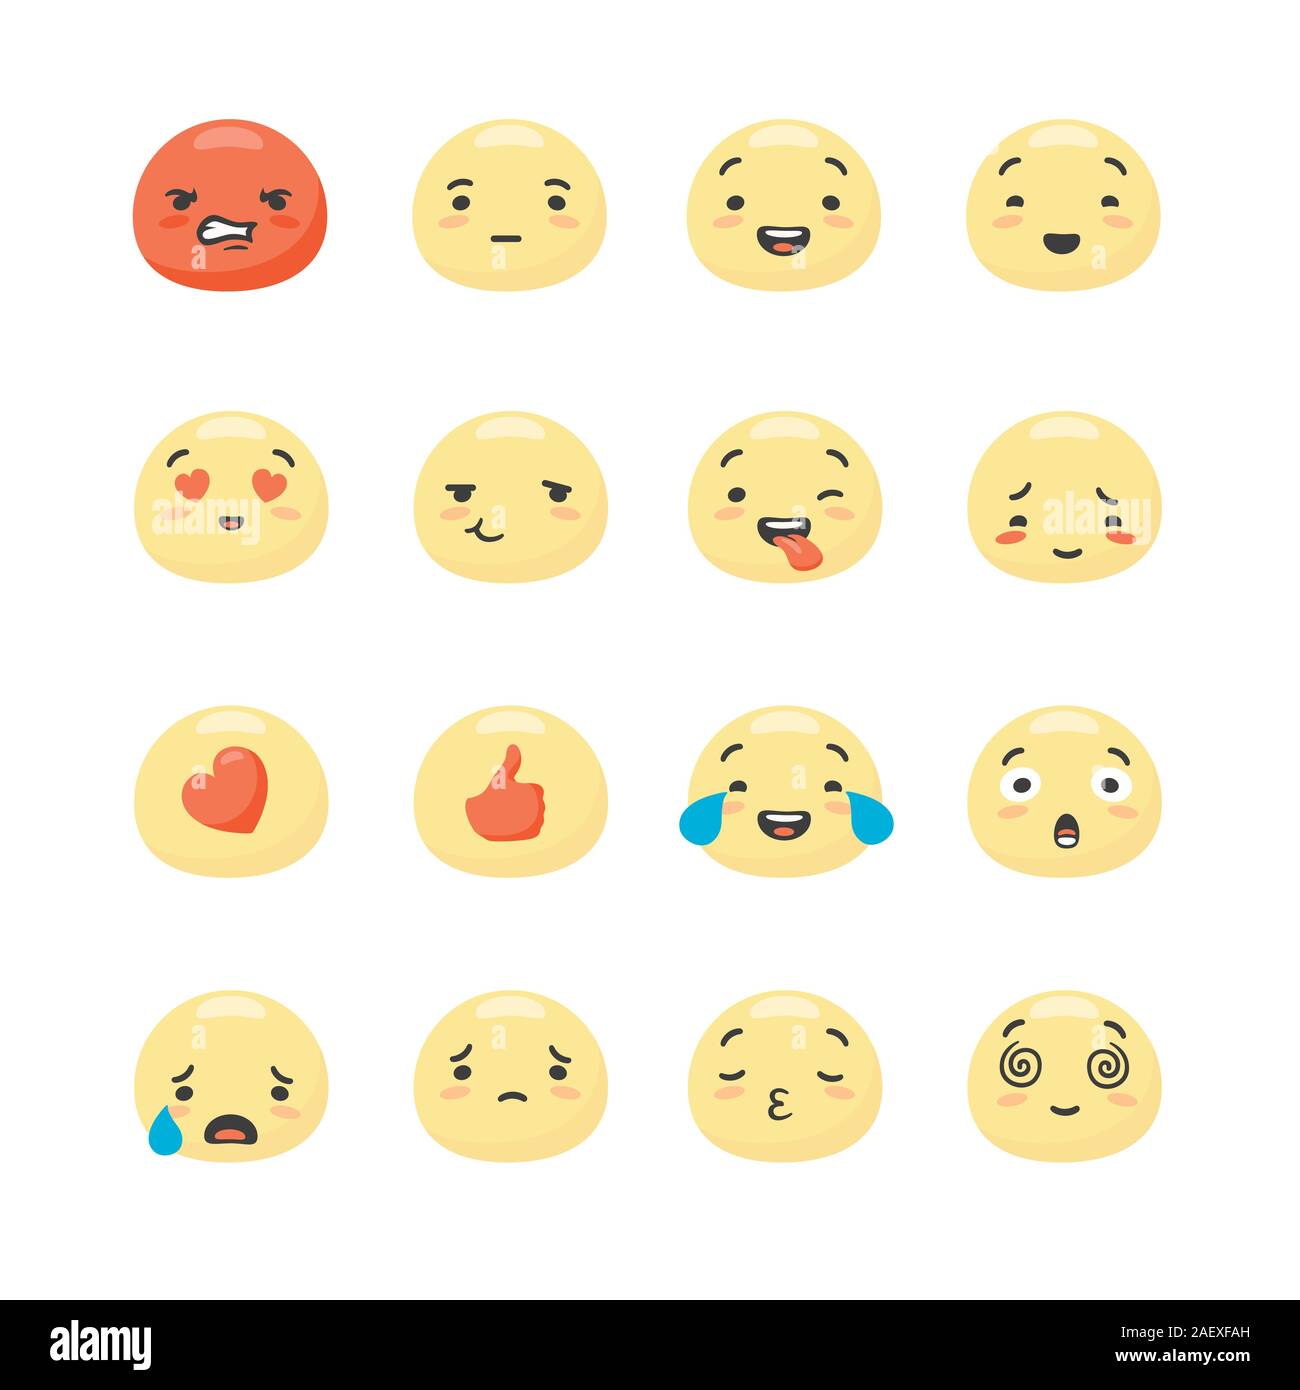 Collection of round yellow smiley faces expressing different emotions Stock Vector